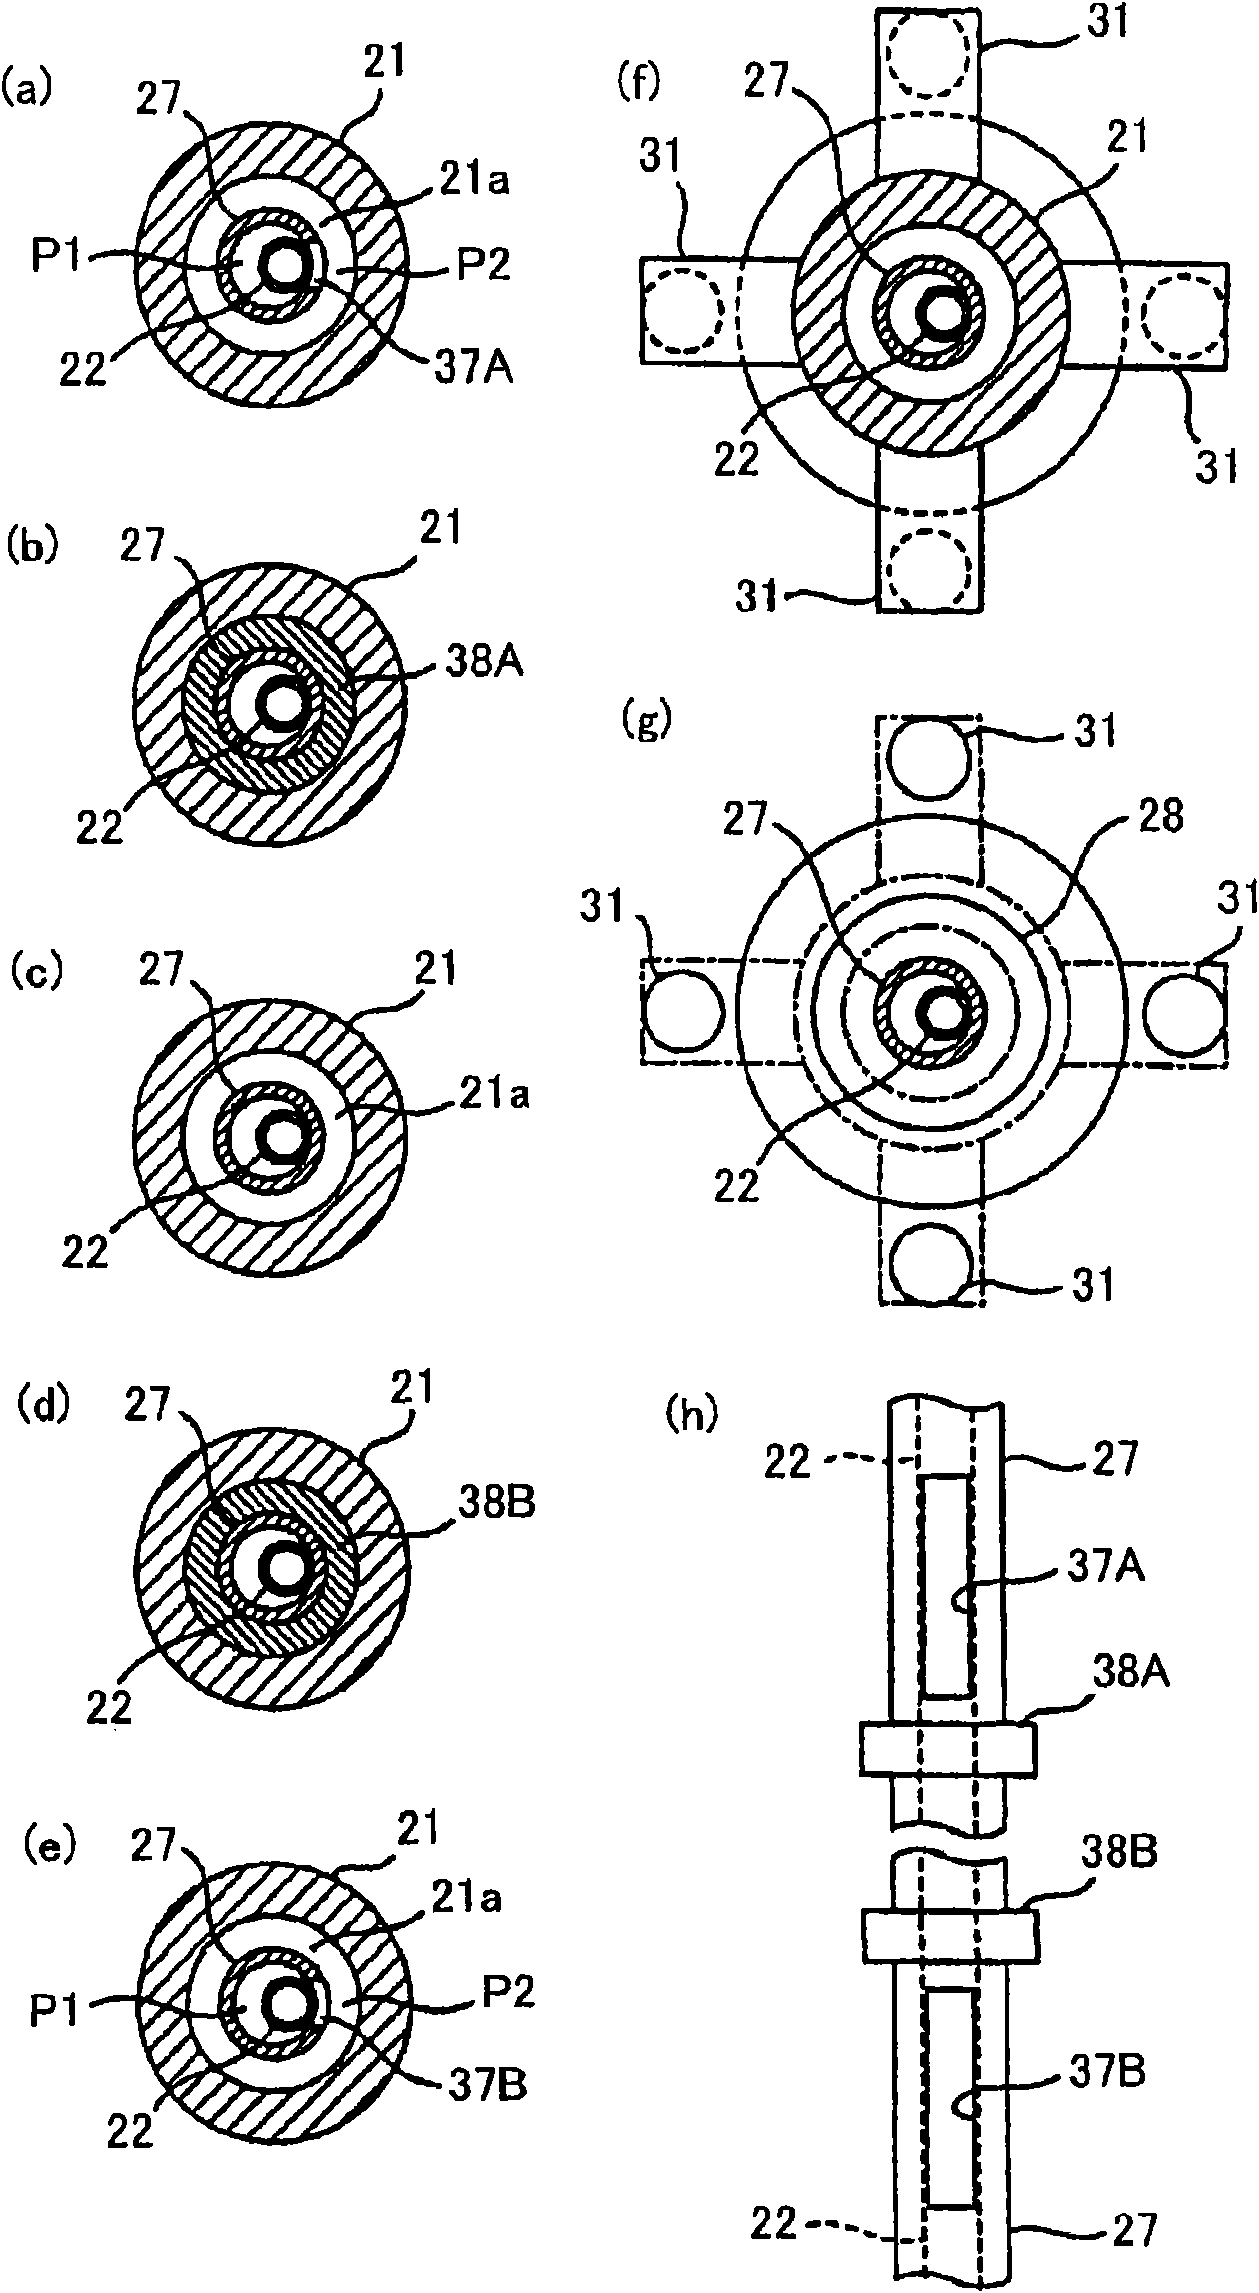 Structure for suppressing flow vibration of instrumentation guide tube